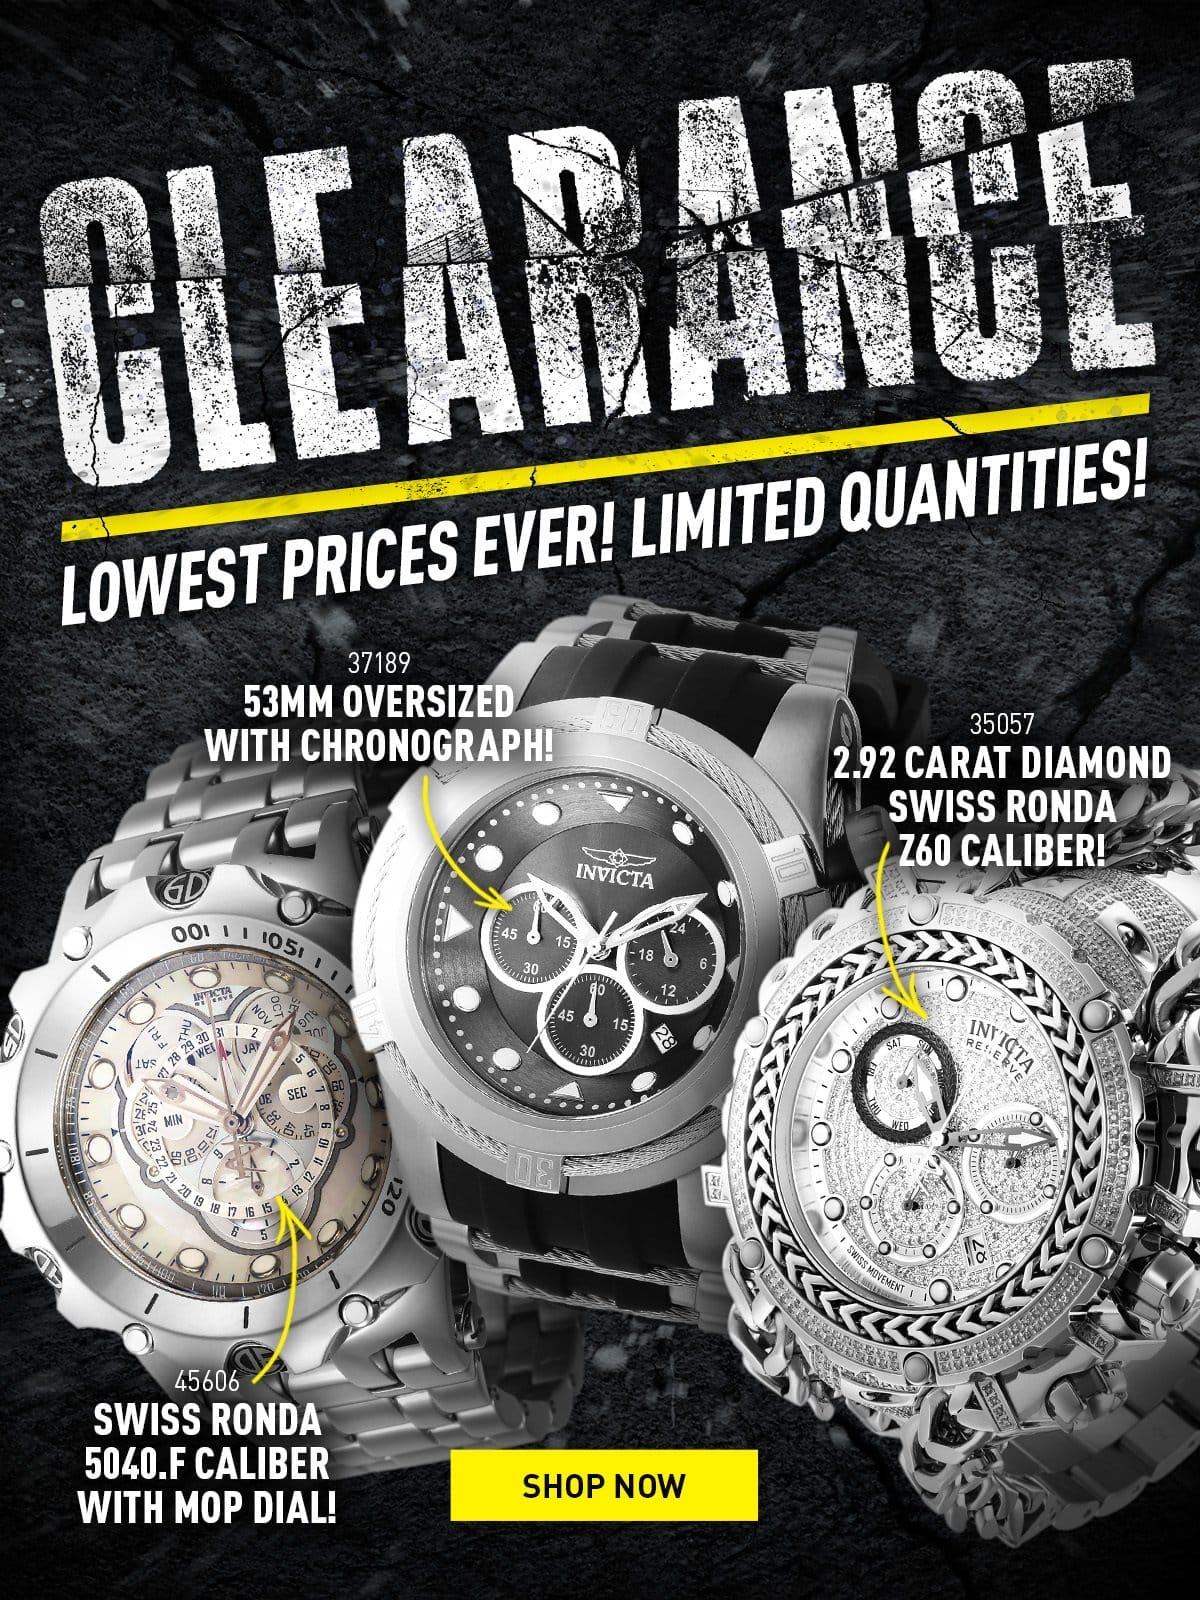 Clearance - Lowest prices ever! Limited quantities!